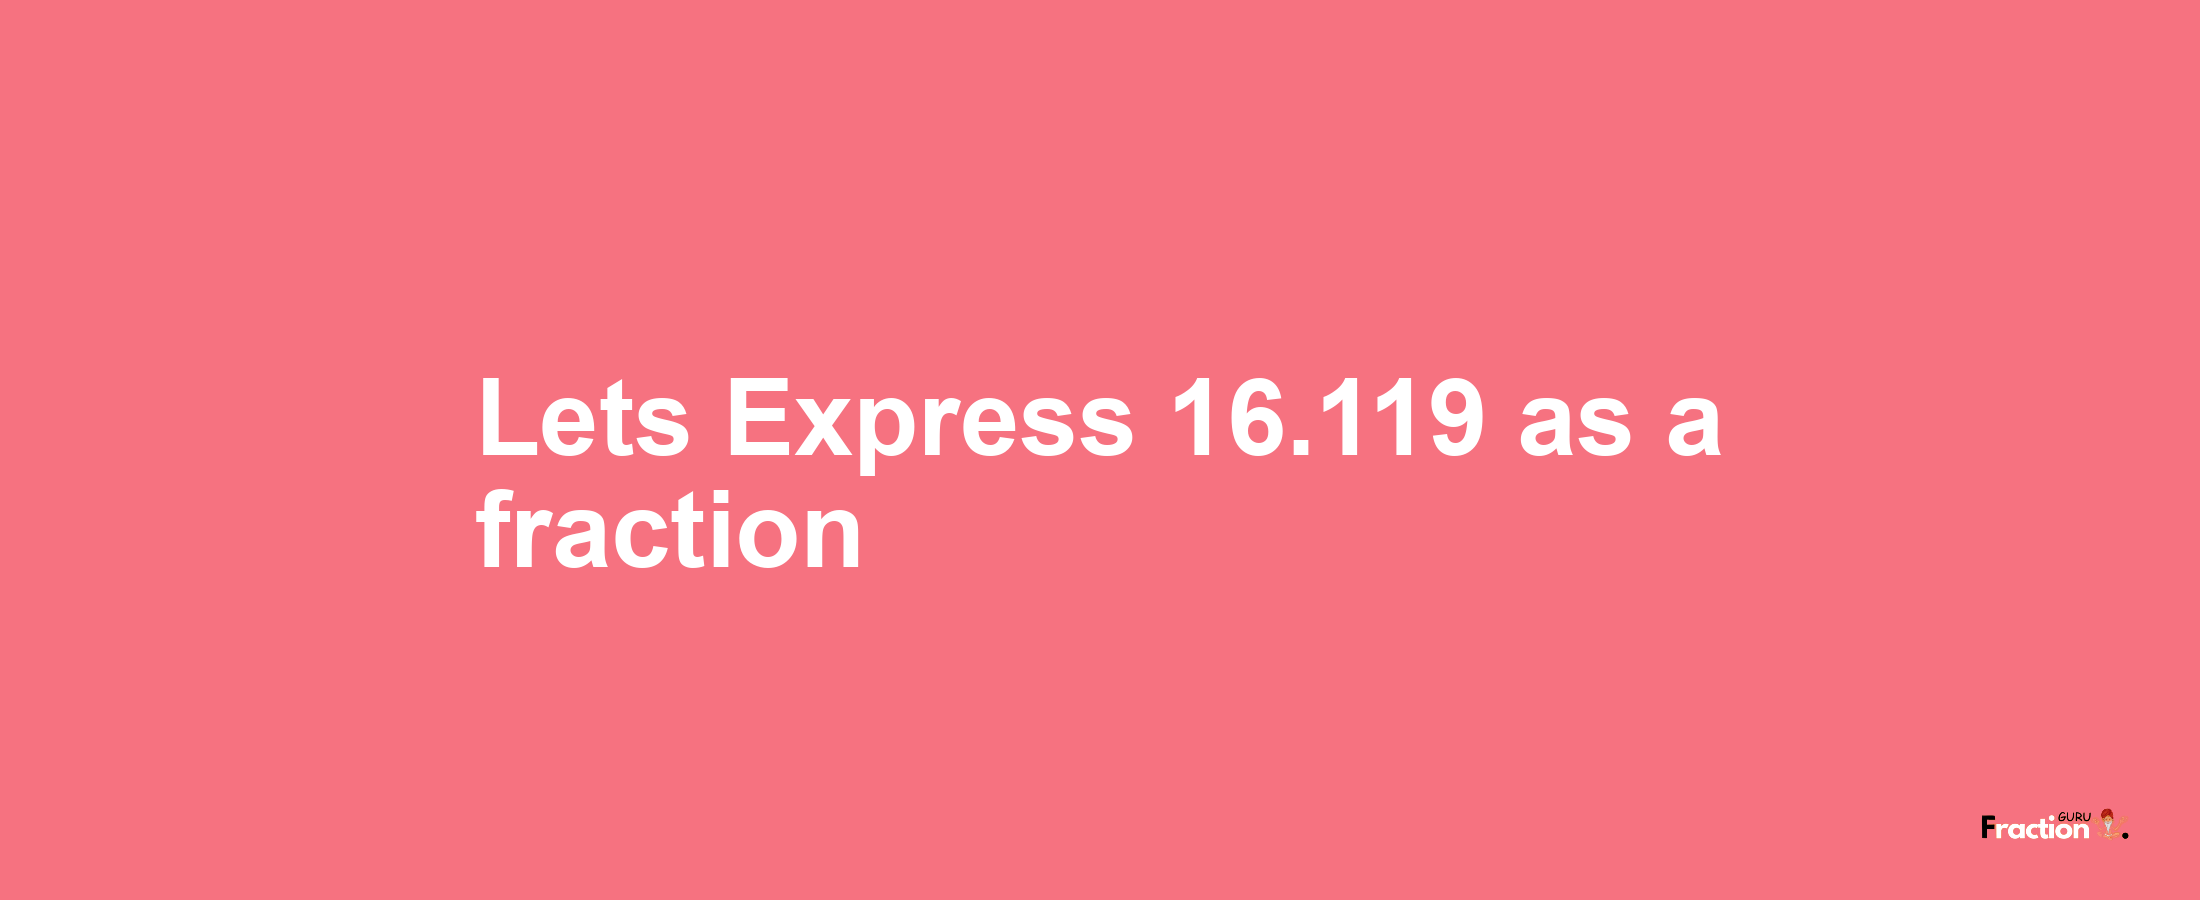 Lets Express 16.119 as afraction